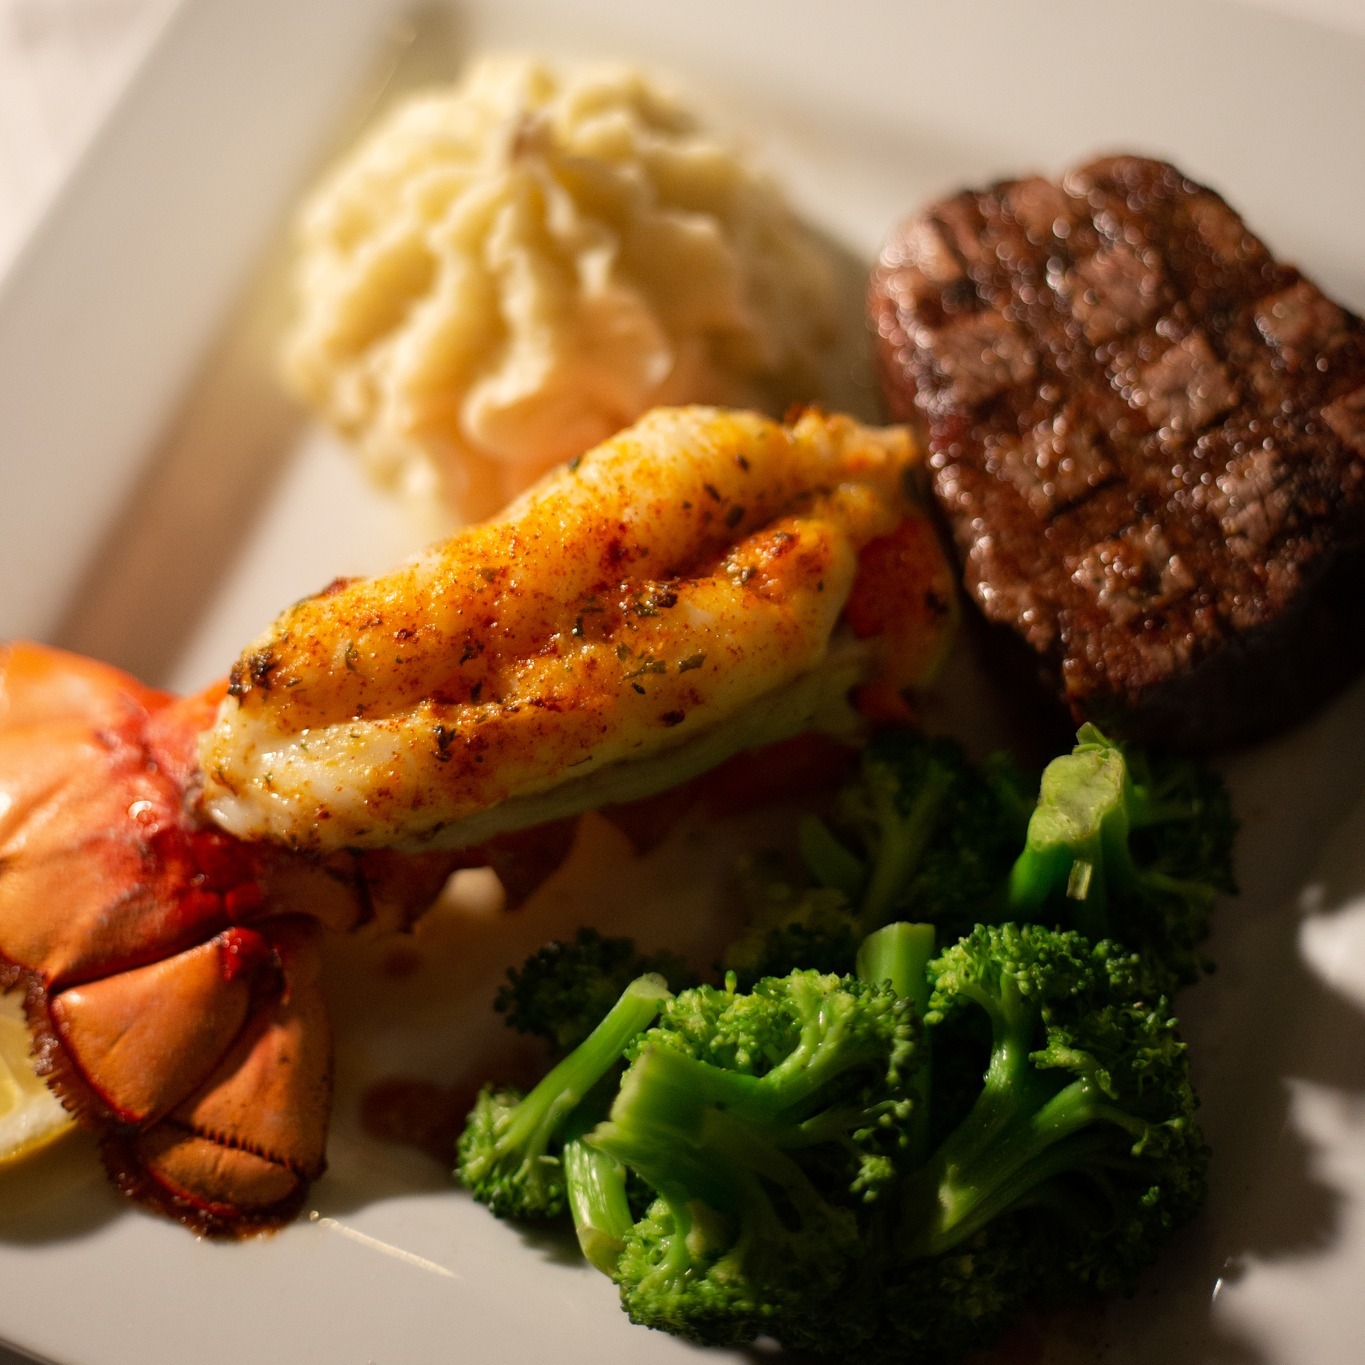 Surf & Turf A 6oz Center Cut Filet & Cold Water Lobster make the ultimate meal. Served with potato and vegetables.